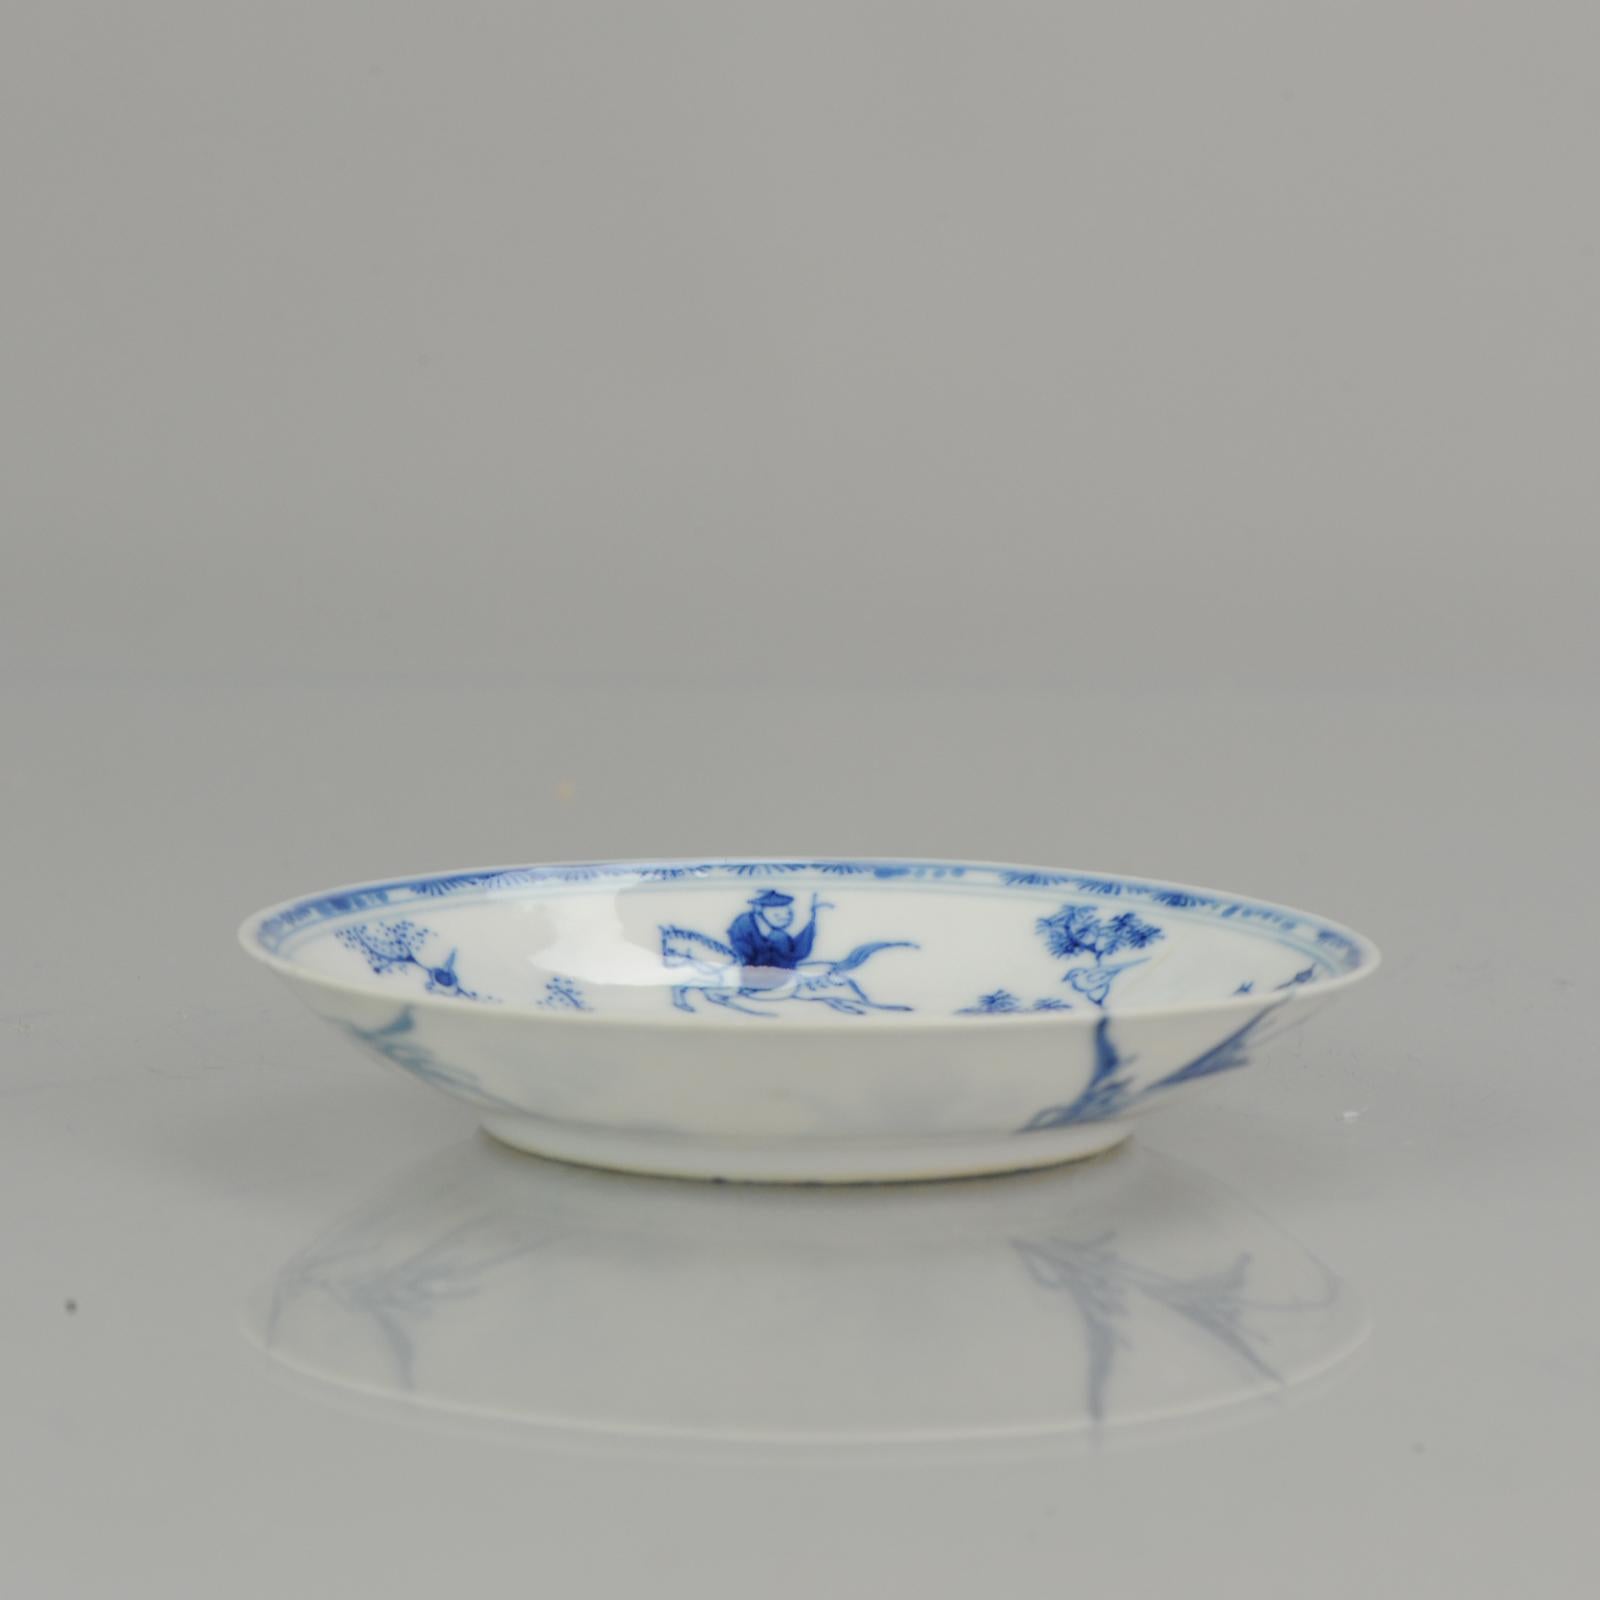 Lovely thinly potted antique Chinese porcelain saucer and cup with a central decoration of a person on horseback next to a tree with a bird in it, executed in a charming underglaze blue. In the border a decoration of patterns identical to those in